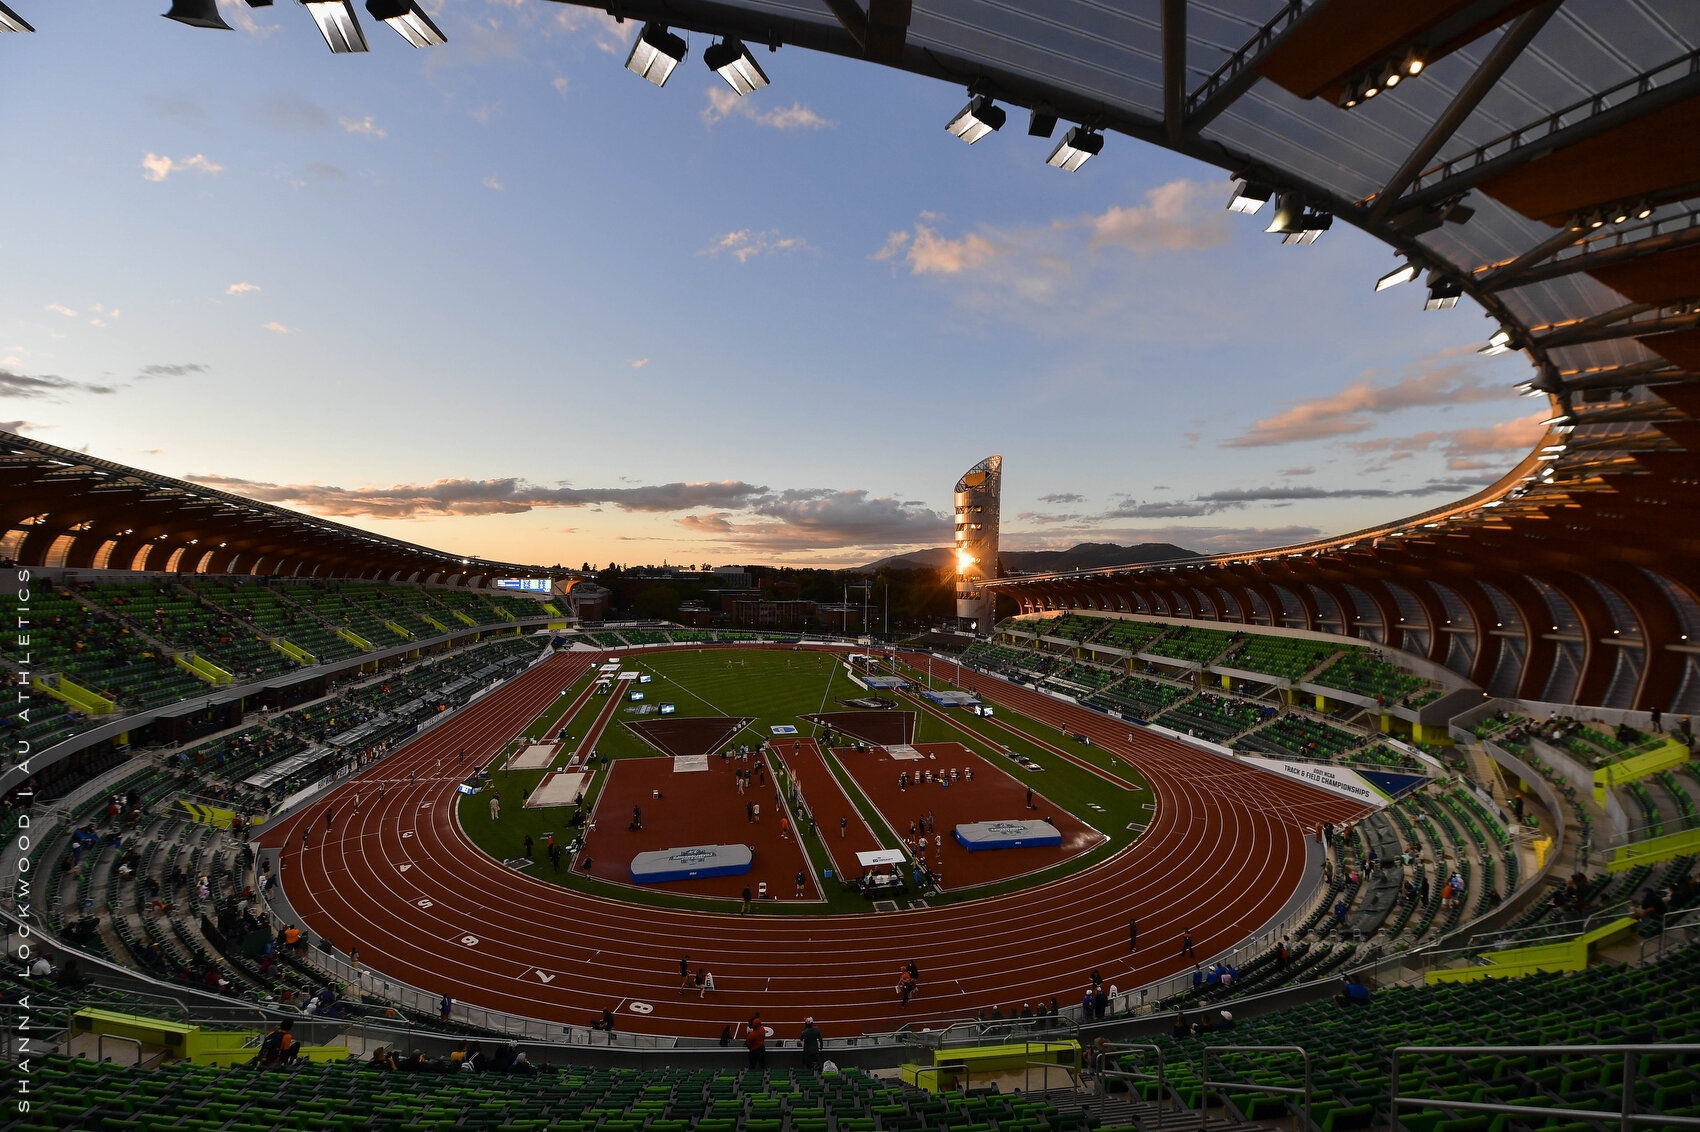  Jun 9, 2021; Eugene, OR, USA; Sunset view during day one of the 2021 NCAA Outdoor Track and Field Championship at Hayward Field. Mandatory Credit: Shanna Lockwood/AU Athletics 